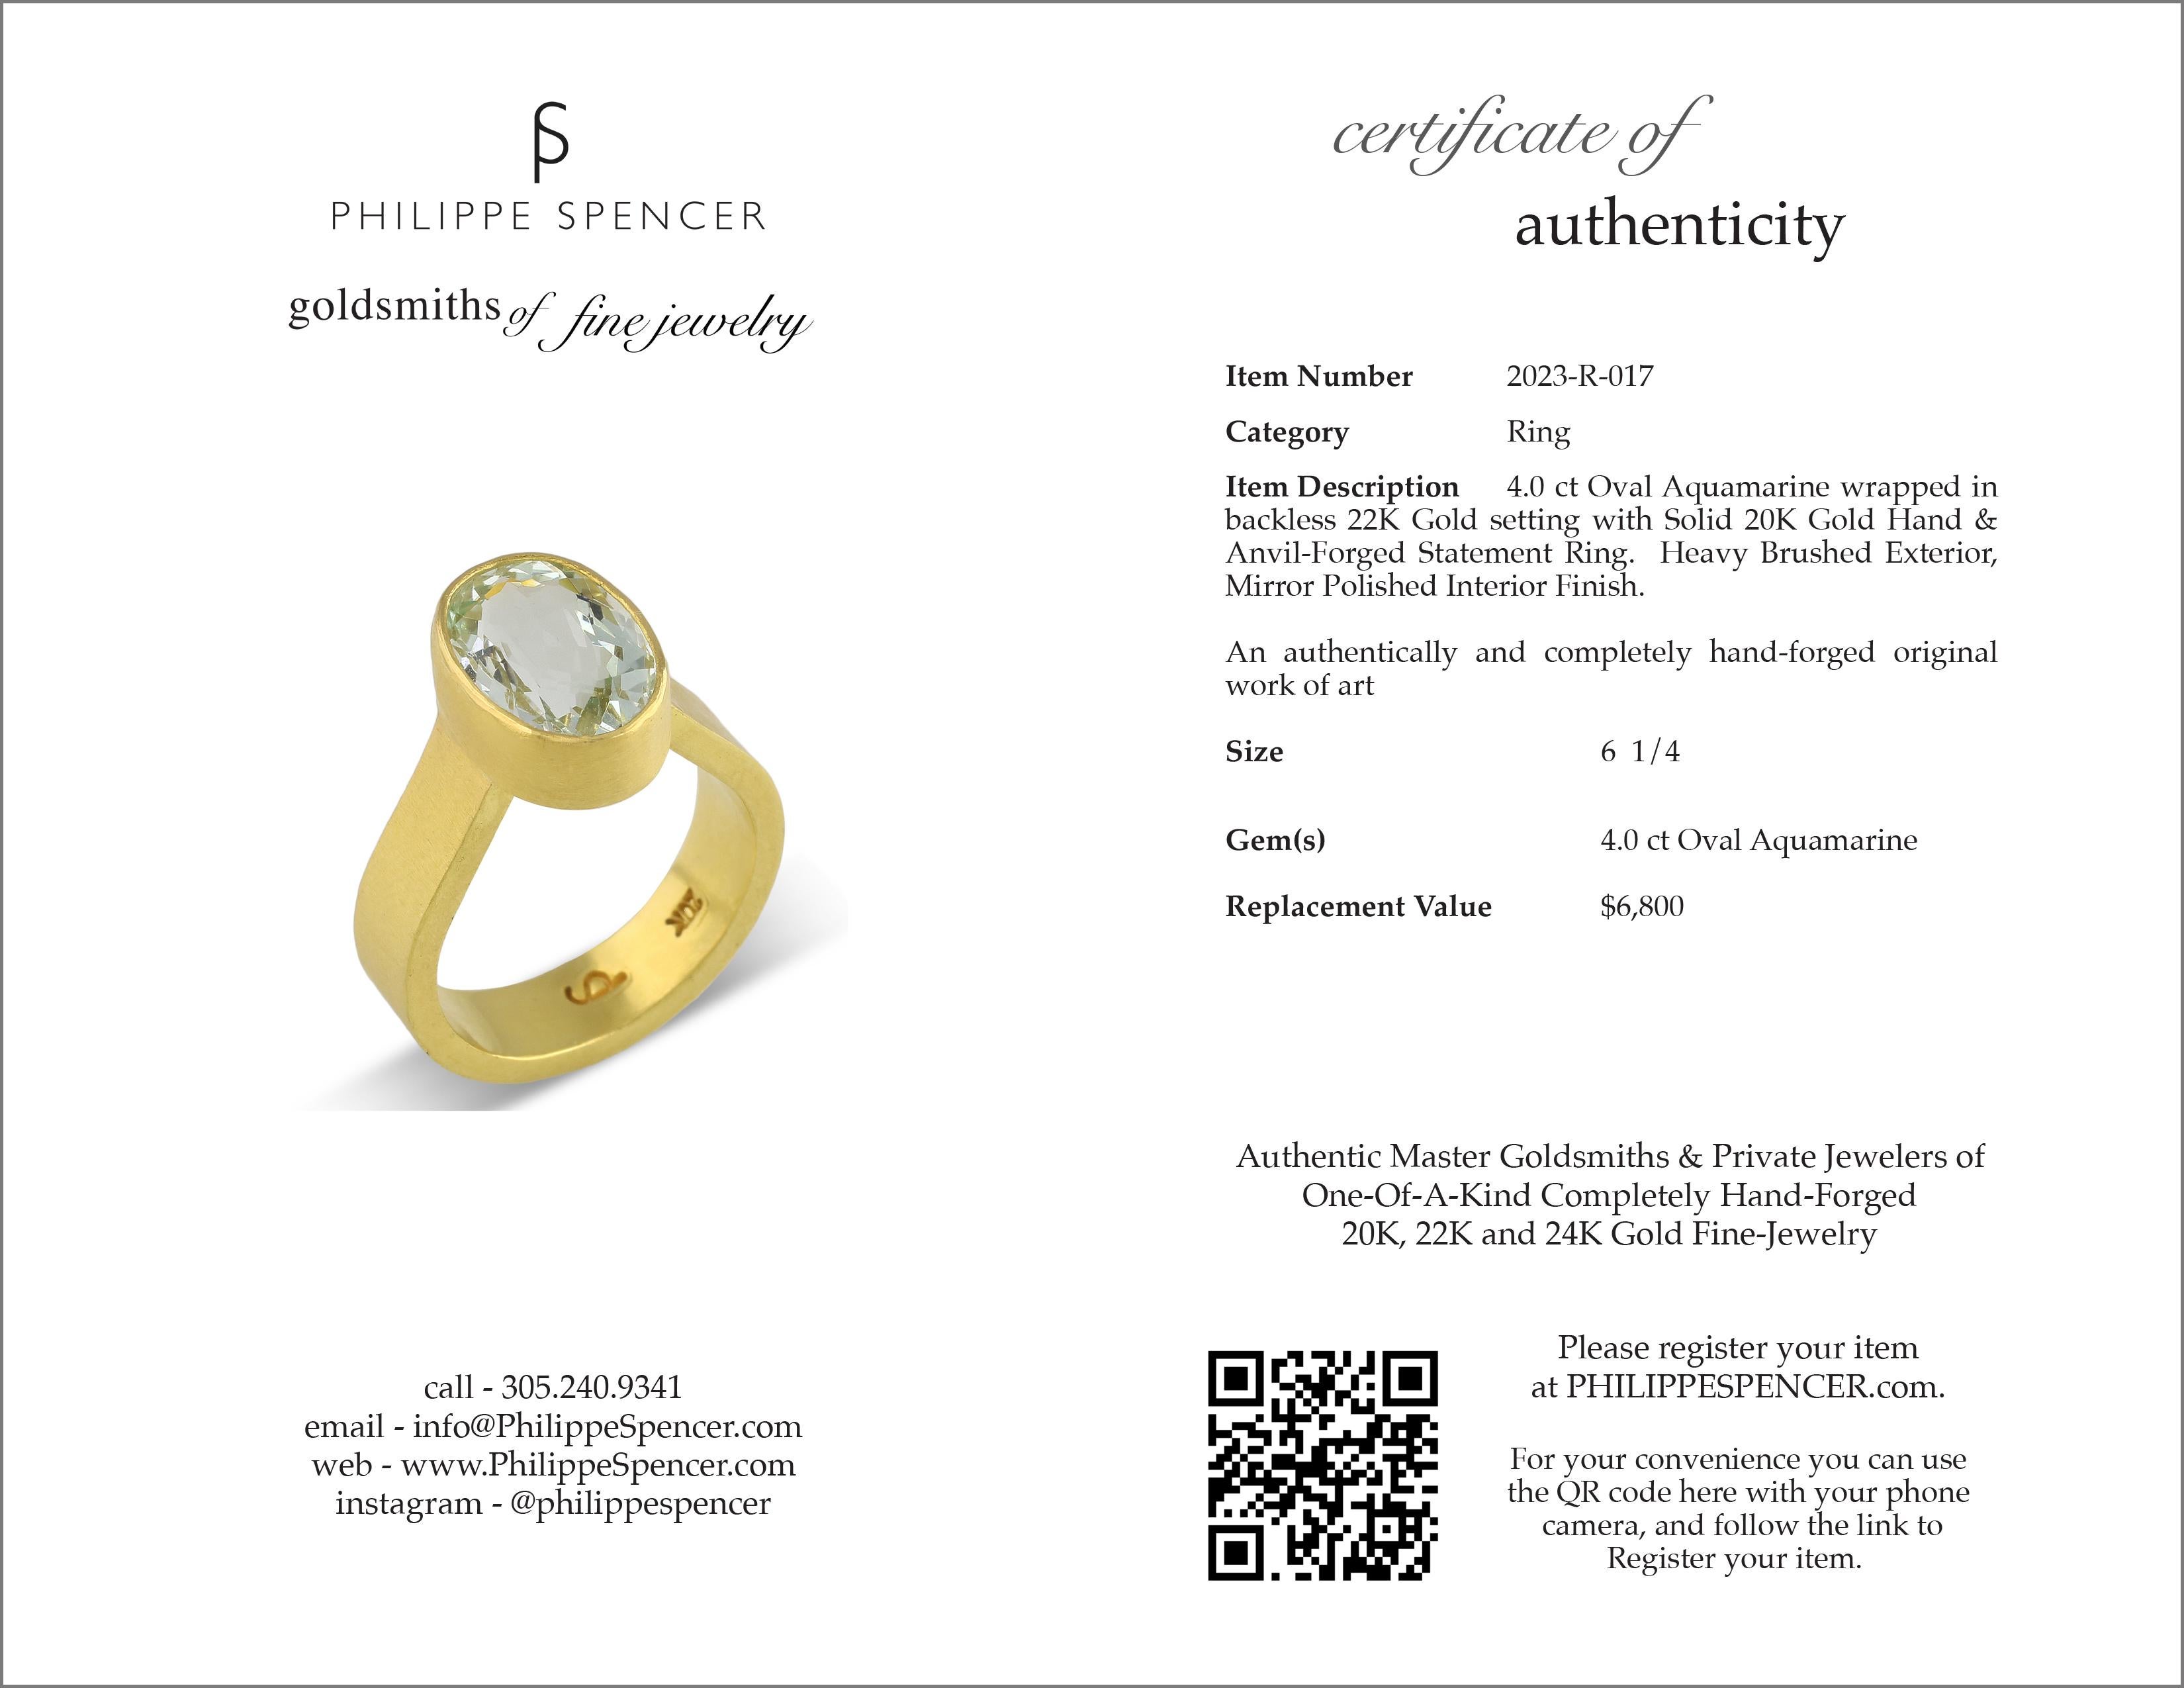 Oval Cut PHILIPPE SPENCER 4.0 Ct. Aquamarine in 22K and 20K Gold Statement Ring